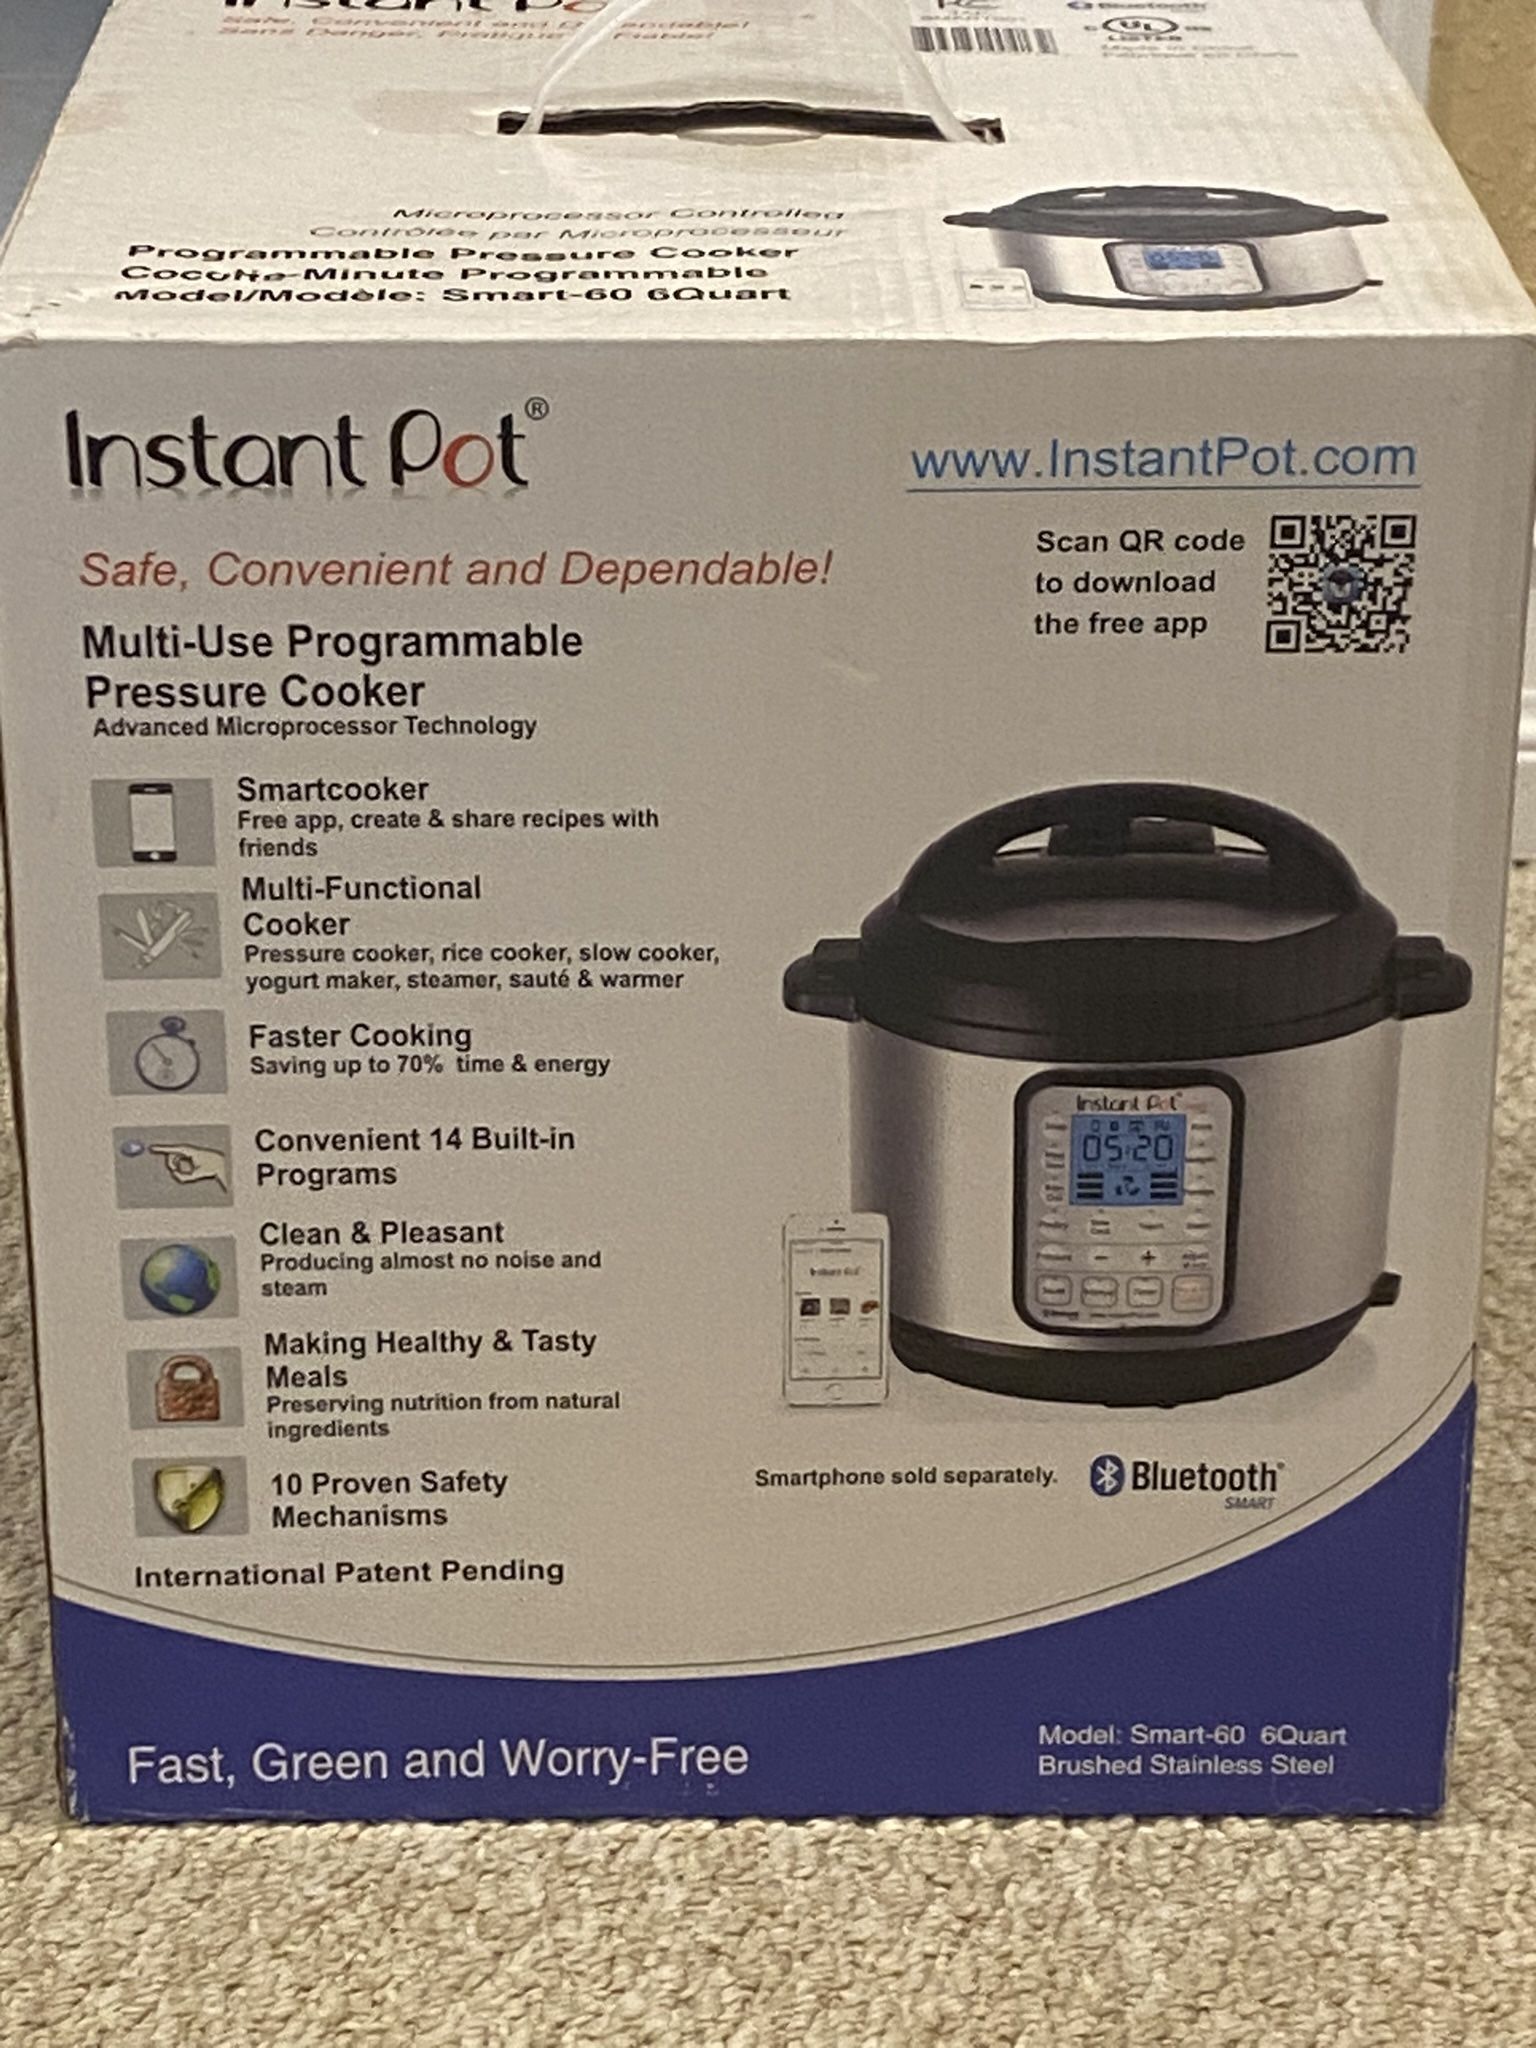 Instant Pot For Sale “Brand New Never Used”